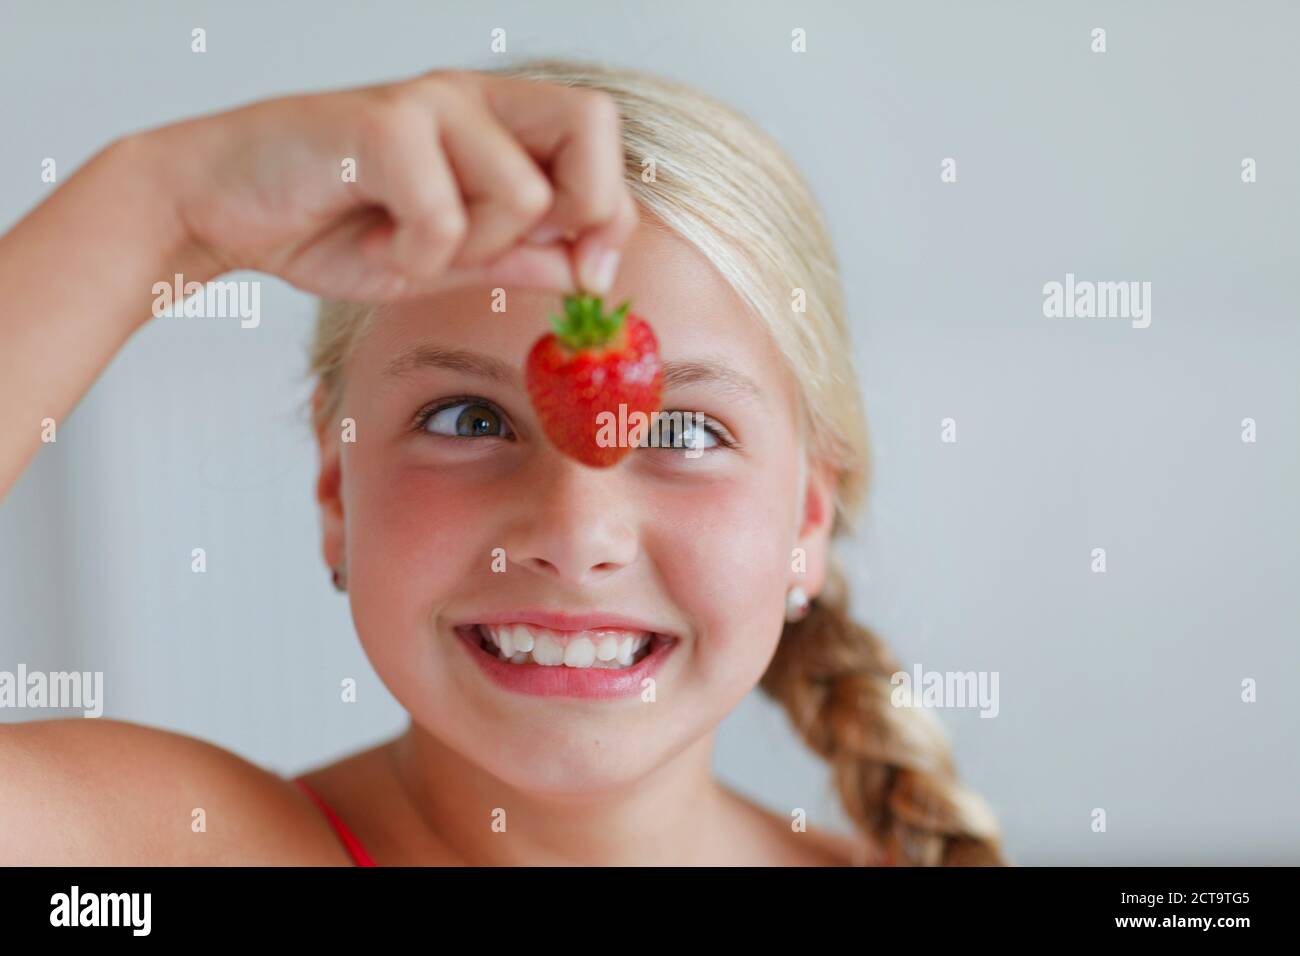 Smiling blond girl looking at strawberry Stock Photo